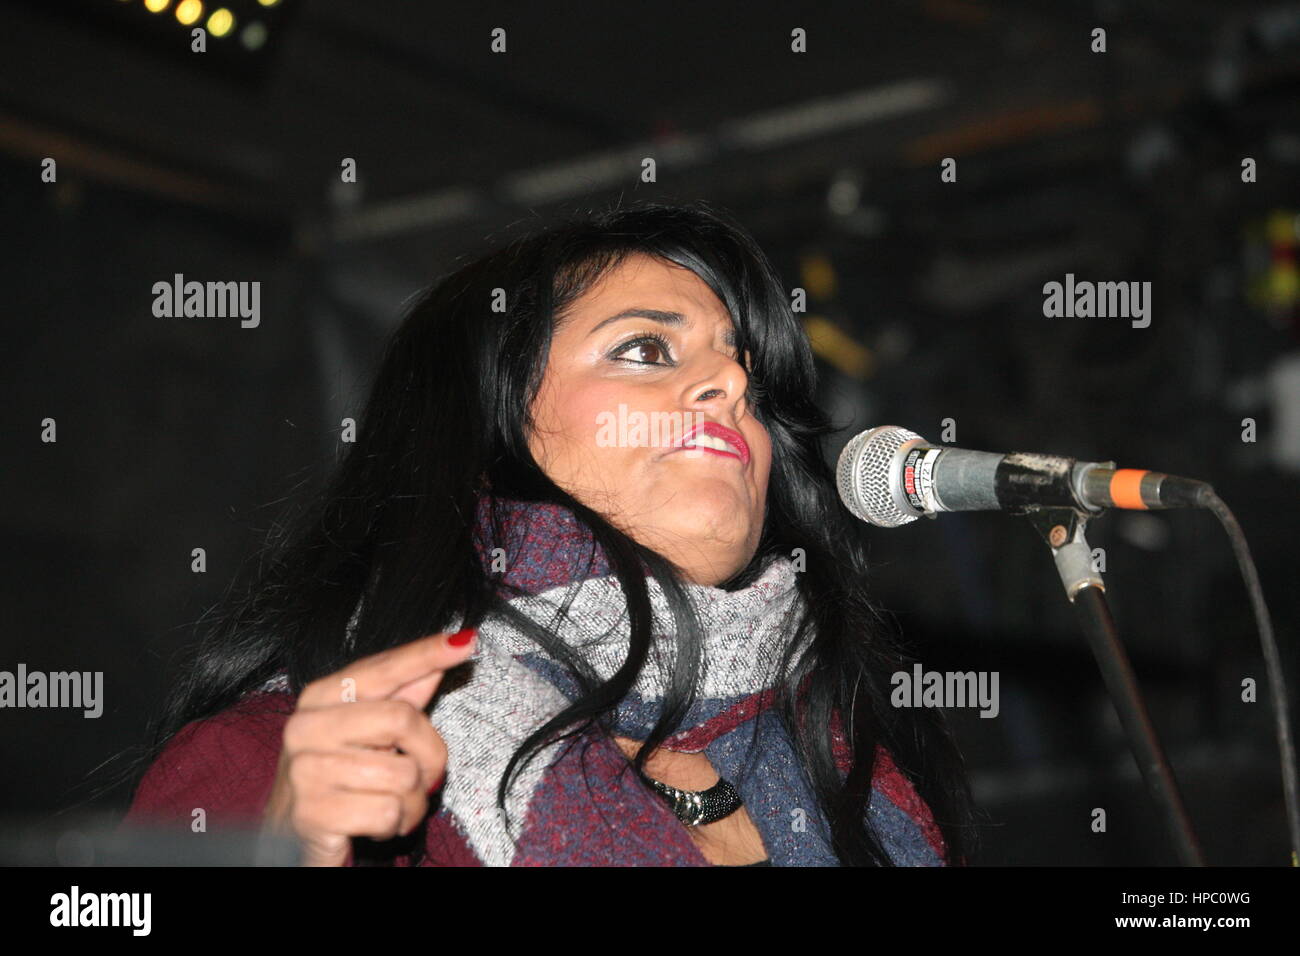 Westminster, London, UK. 20th Feb, 2017. A Stop Trump rally is held outside the UK Parliament, while inside MPs debate a petition signed by 1.8 million people calling for an invitation to the US president to visit the UK to be withdrawn. Anti-racism campaigner Maz Saleem addresses the crowd. Credit: Roland Ravenhill/Alamy Live News Stock Photo